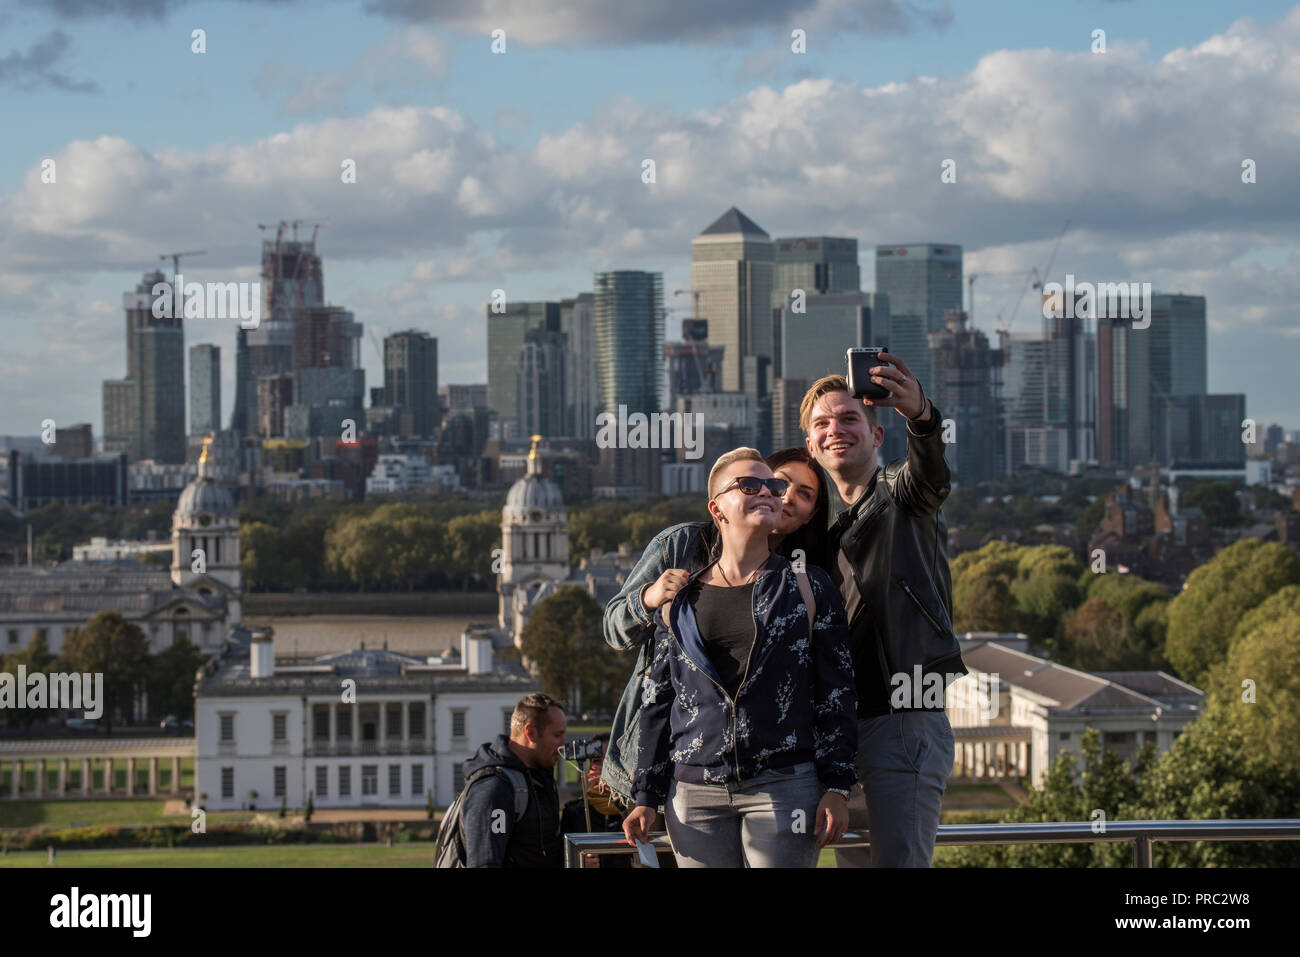 London Panorama from Greenwich Park, England UK. 22 September 2018 Taking selfie photographs with Canary Wharf as a backdrop. 20th and 21st cntury Can Stock Photo